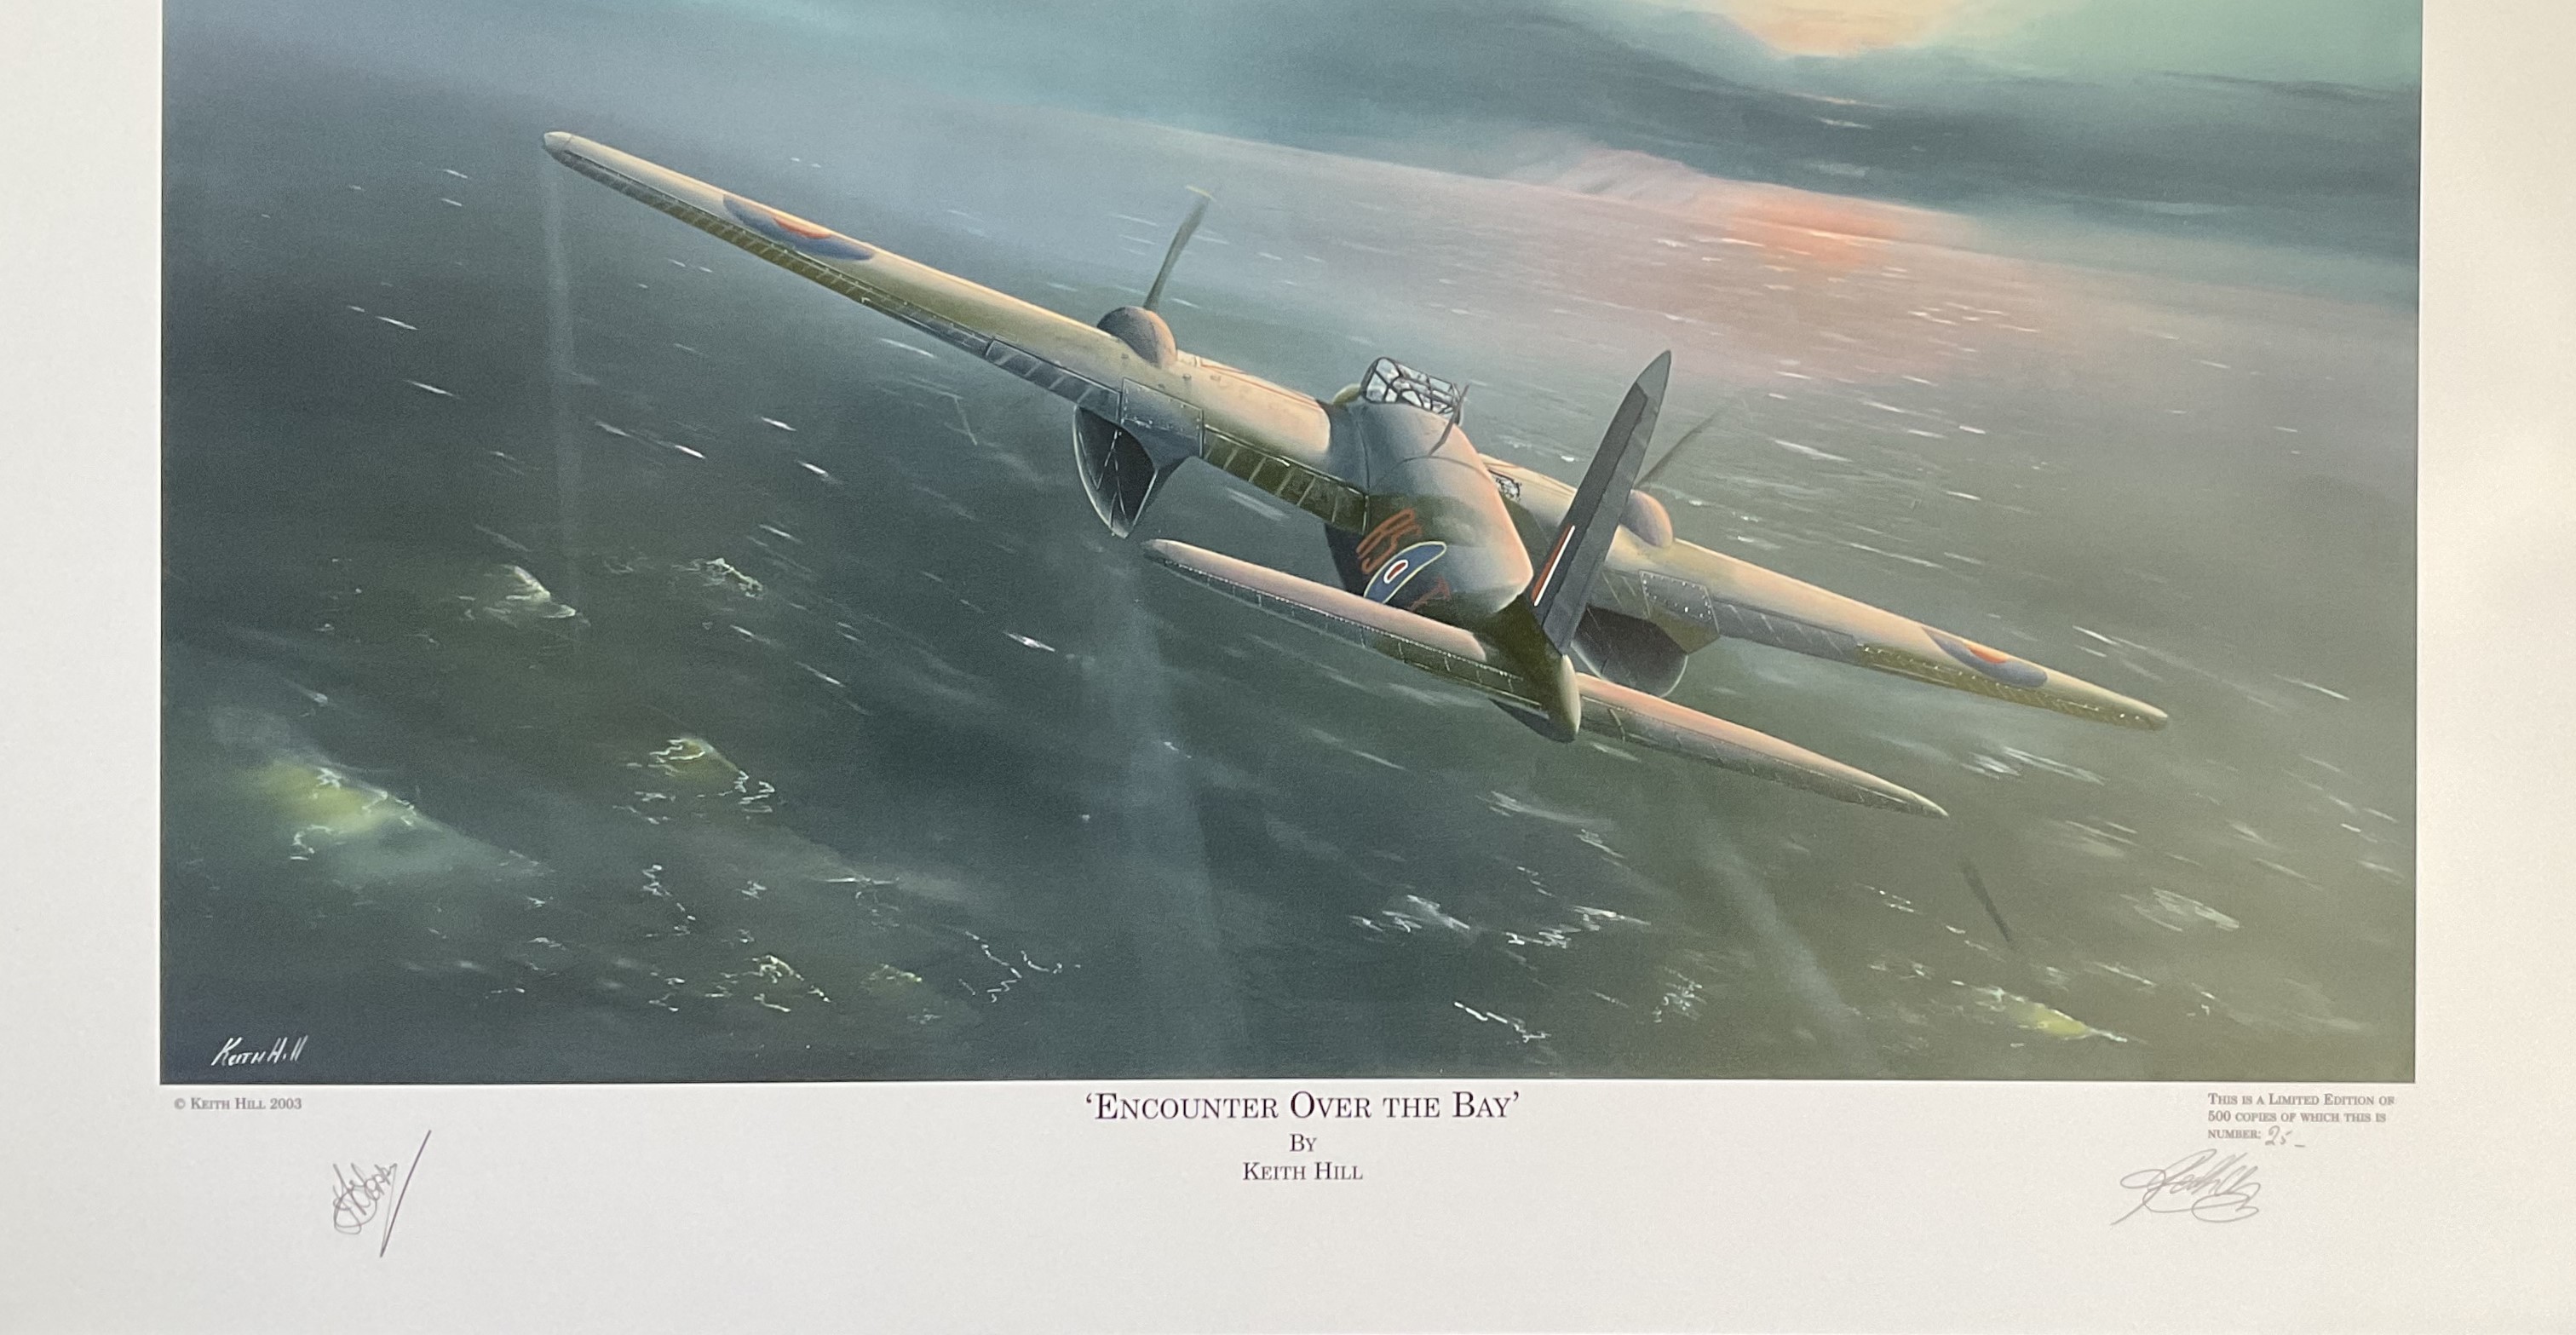 WW2 Colour Print Titled Encounter Over The Bay by Keith Hill. Signed by Keith Hill Artist and Wing - Image 2 of 2